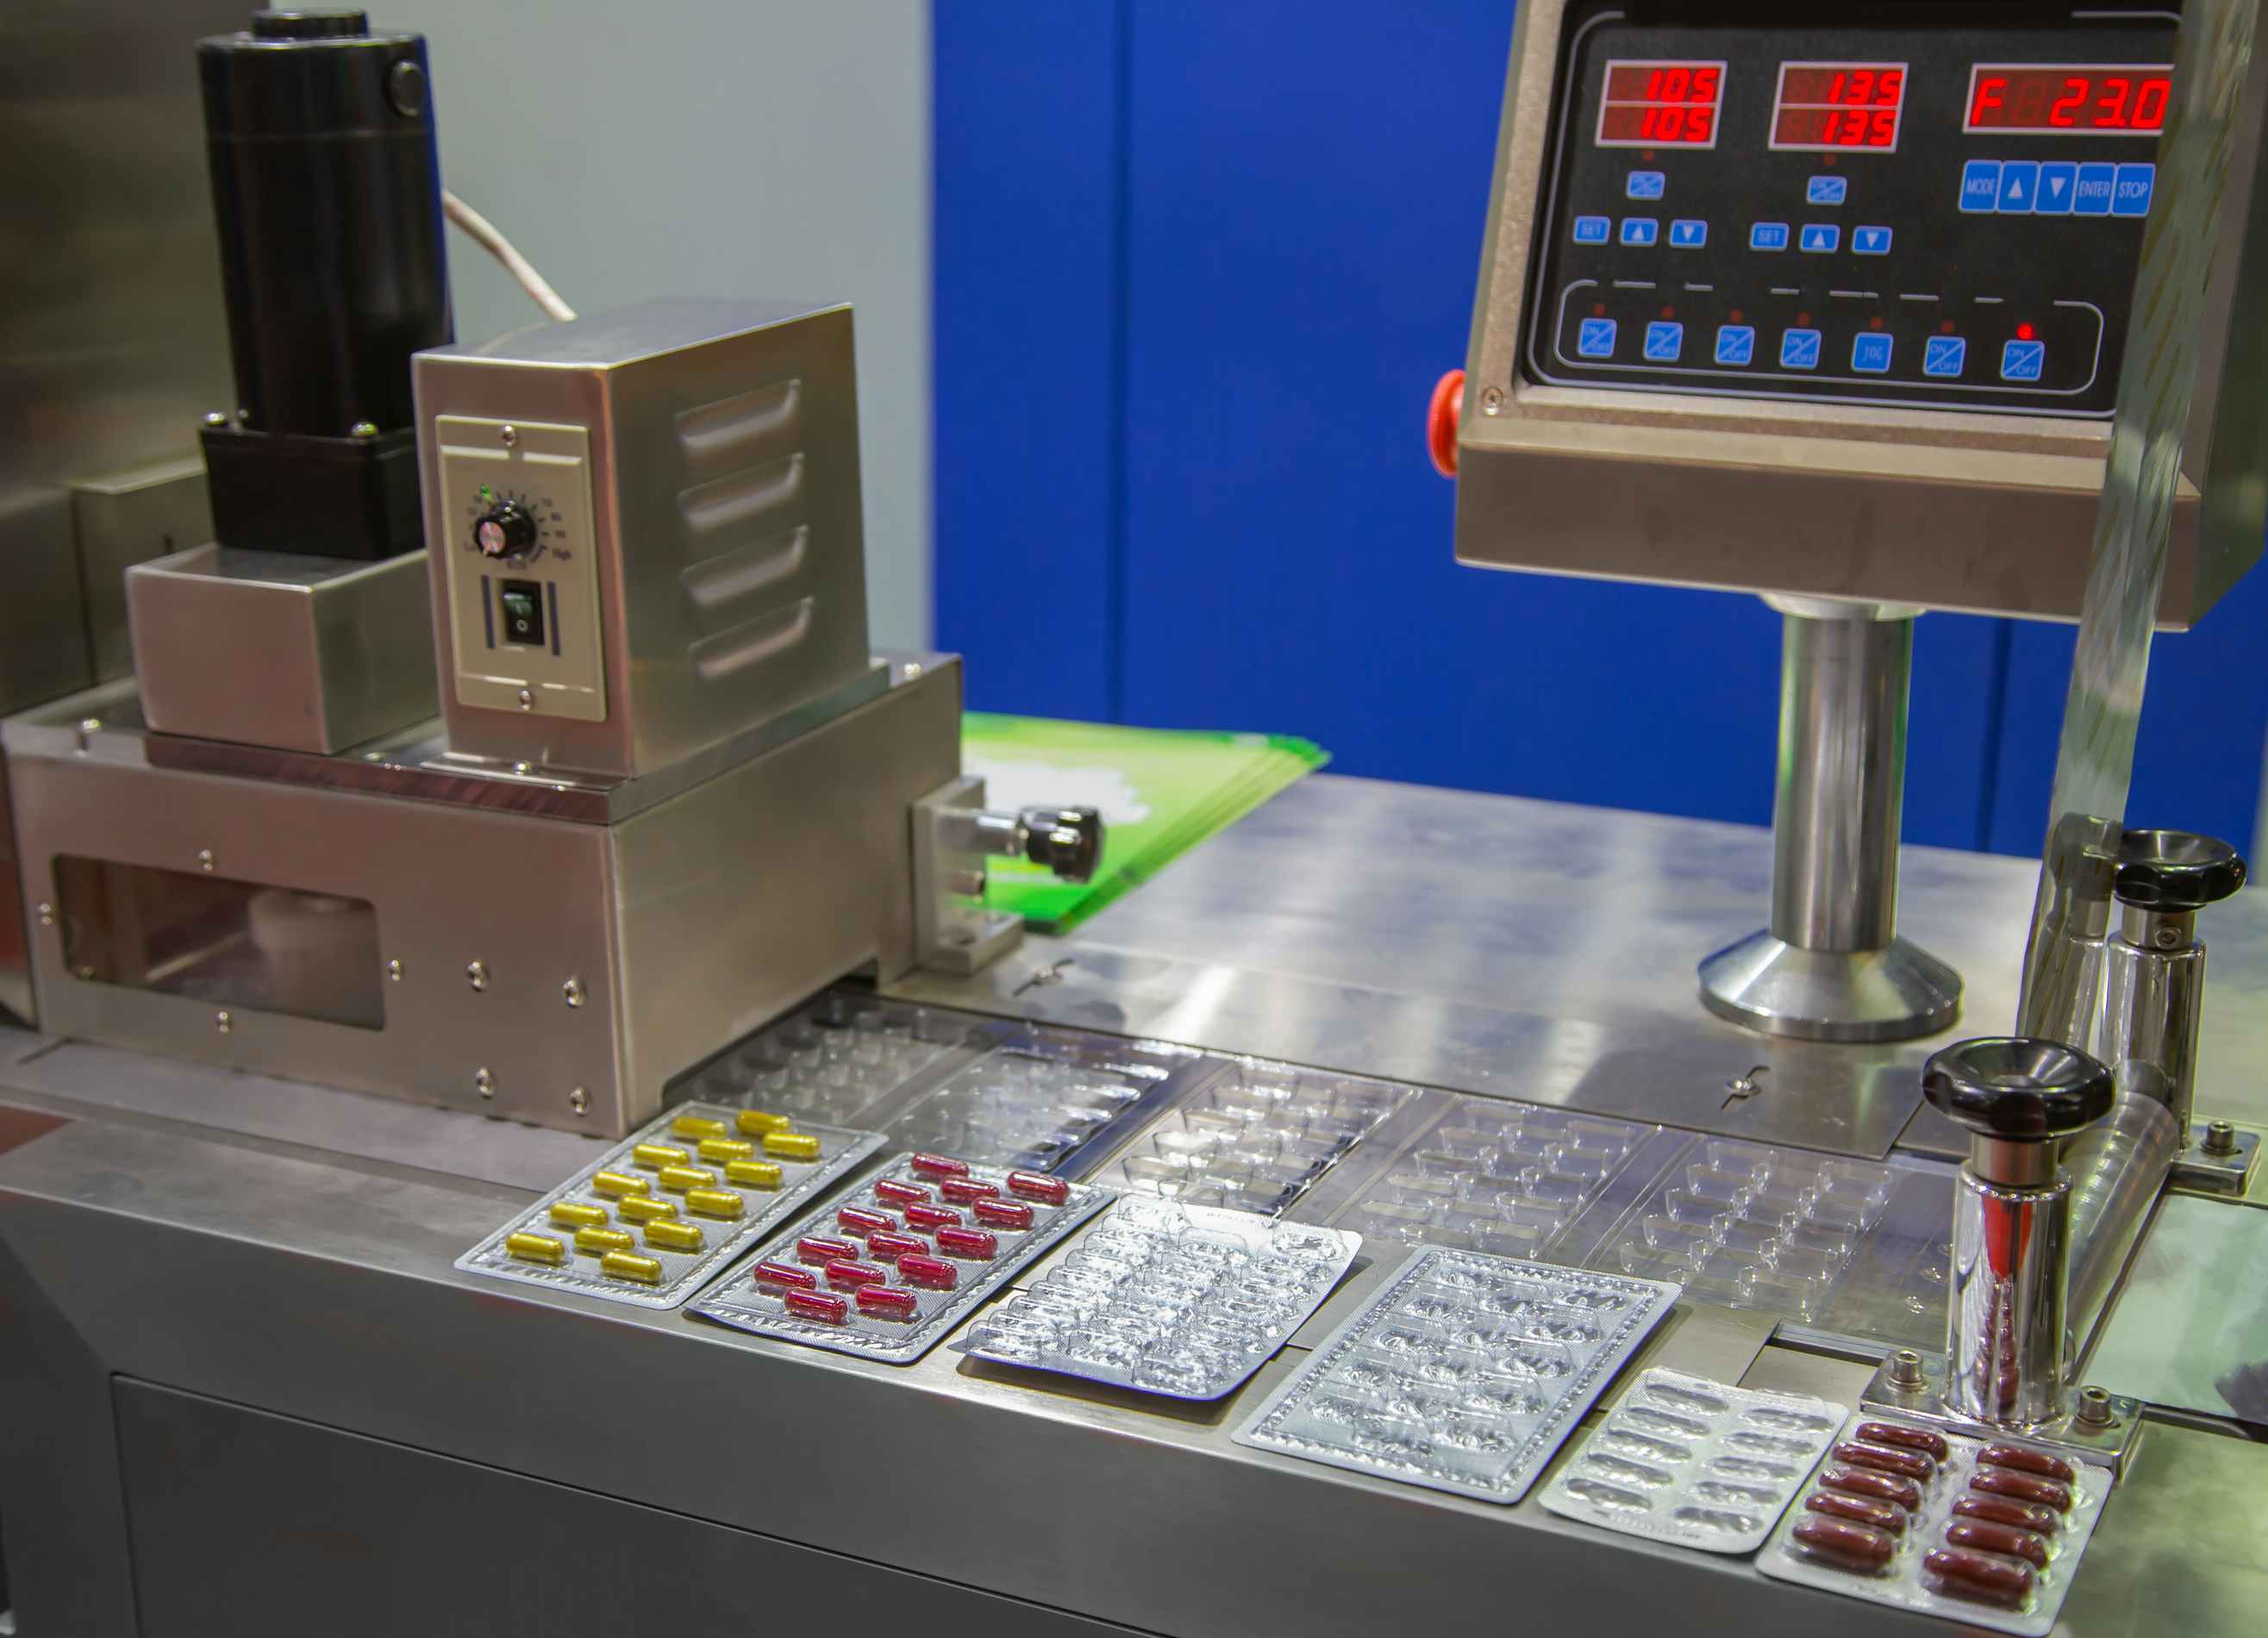 Capsule blister packing machine in pharmaceutical industrial; these will be ramped up during the childrens tylenol shortage